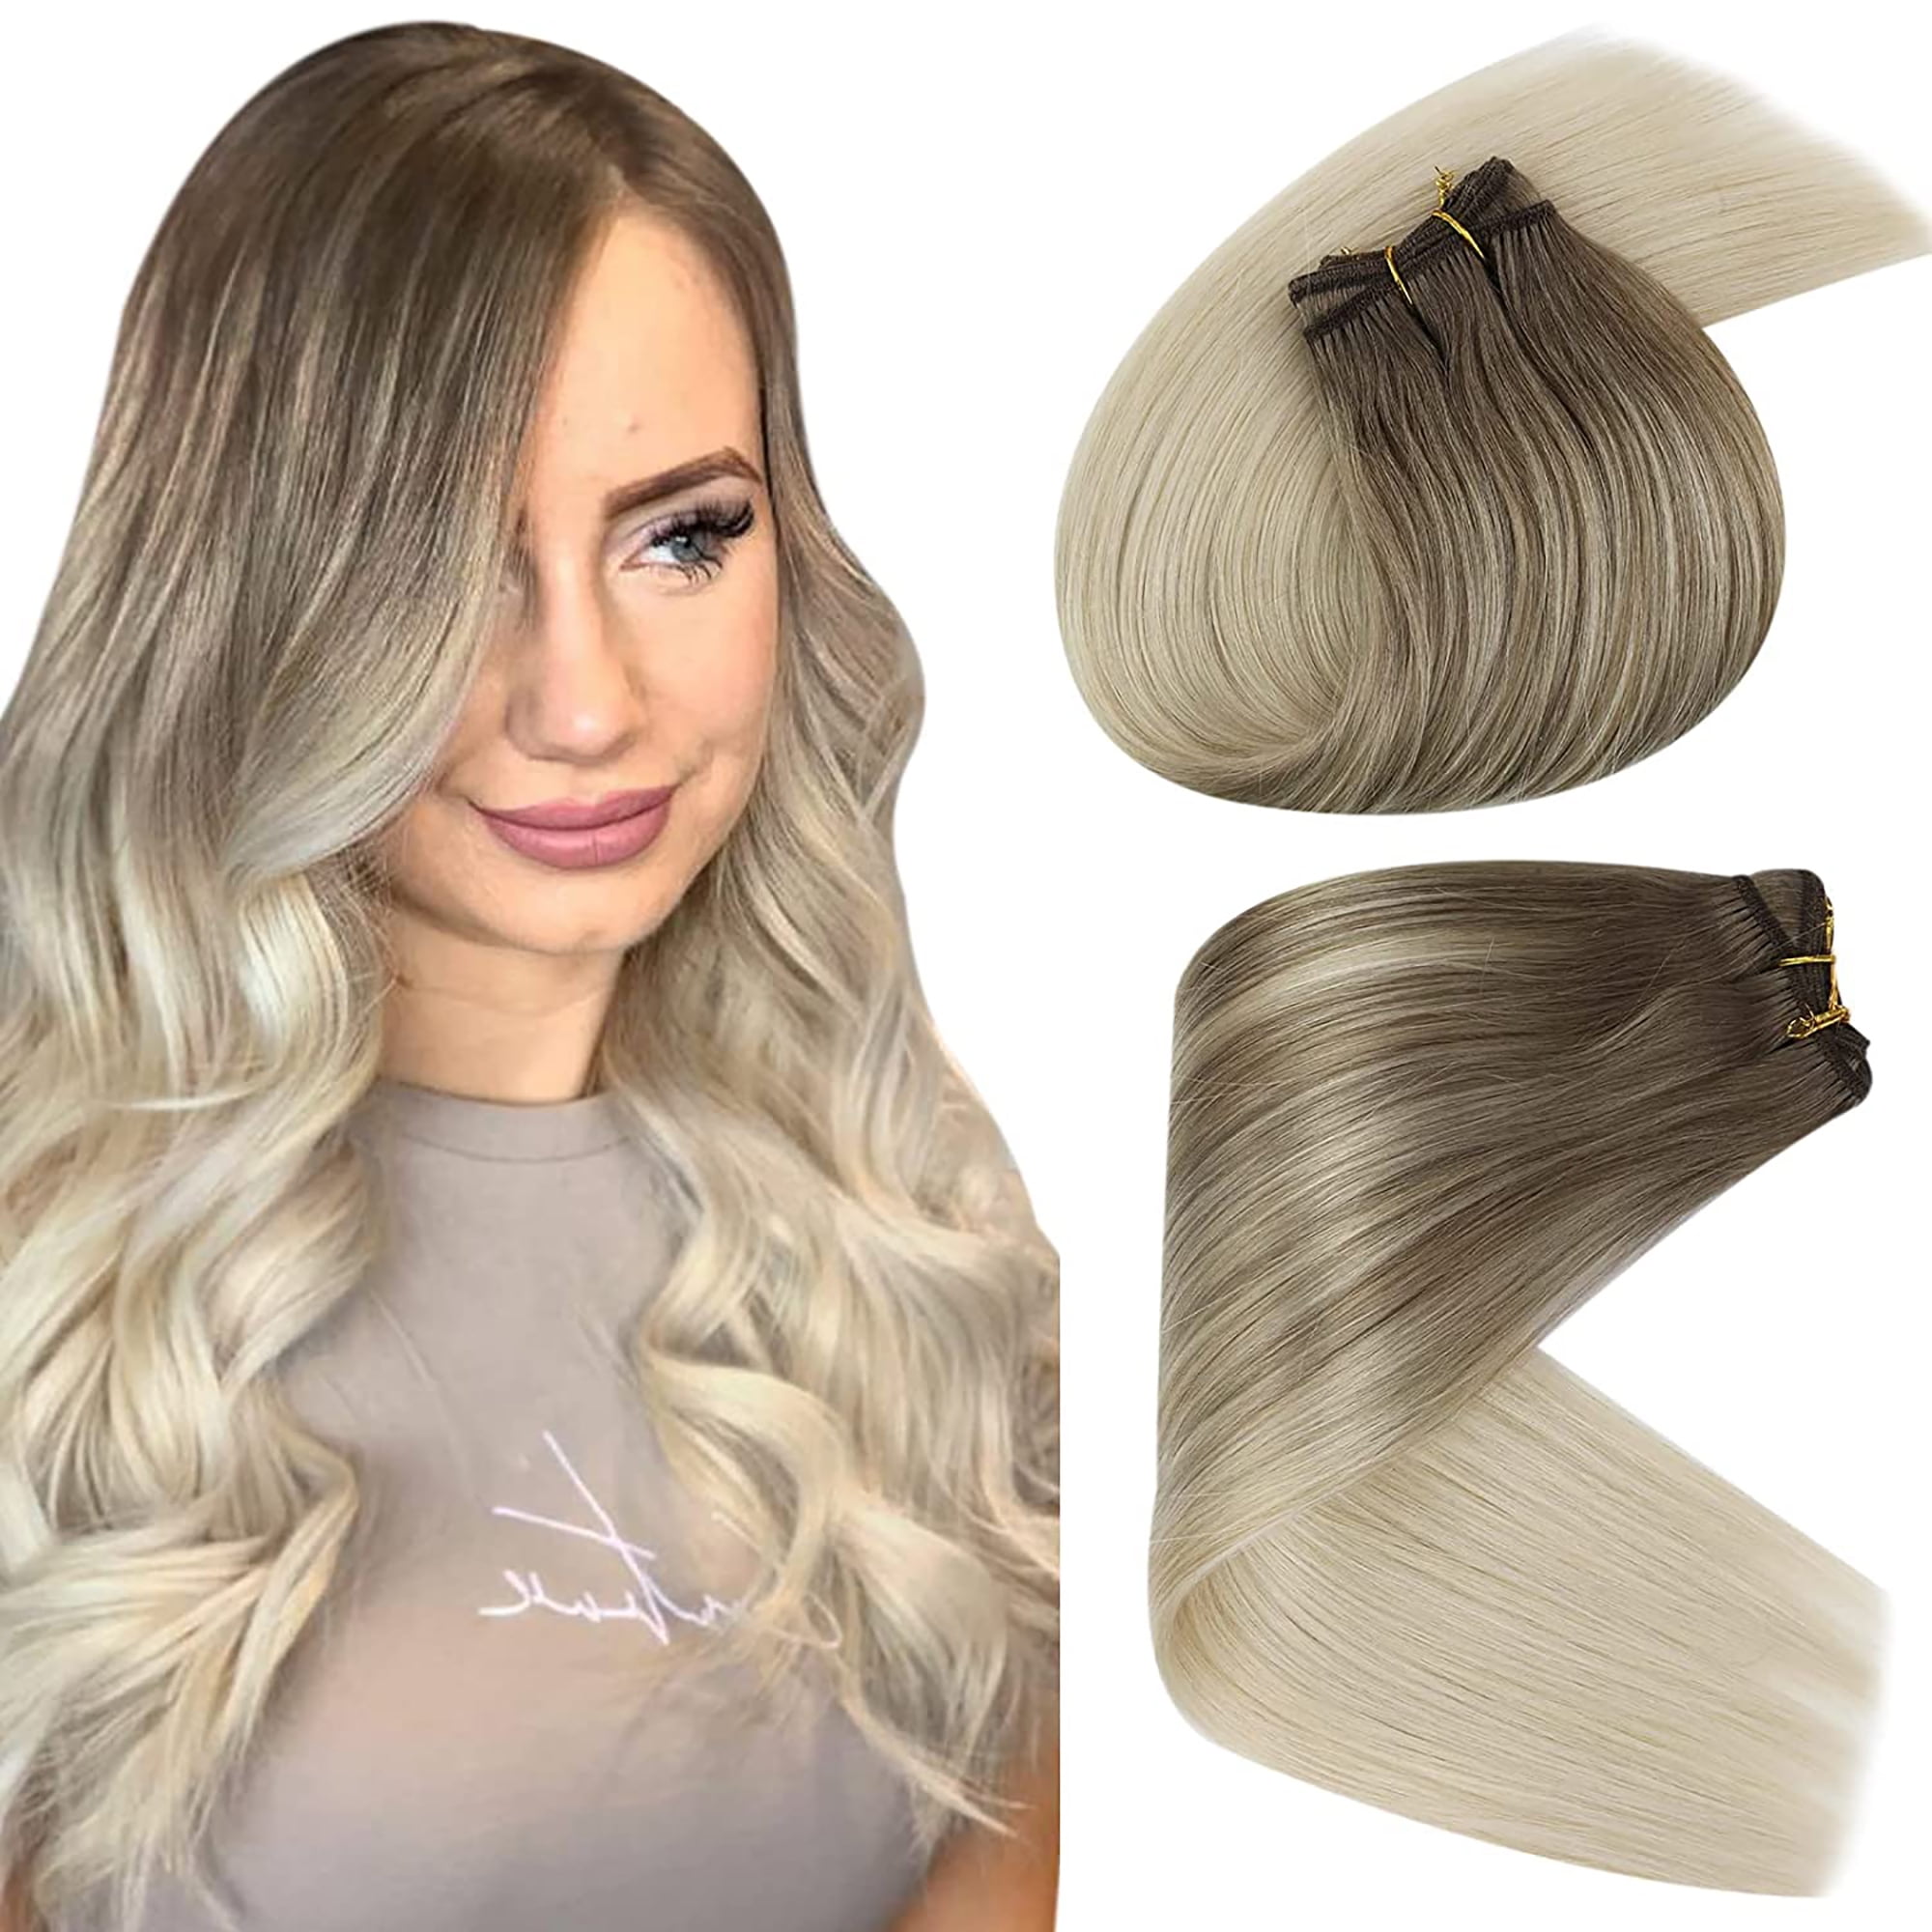 Sunny Weft Human Hair Extensions Sew in Light Brown to Platinum Blonde  Balayage 24 inch 100g Hair Extensions Remy 